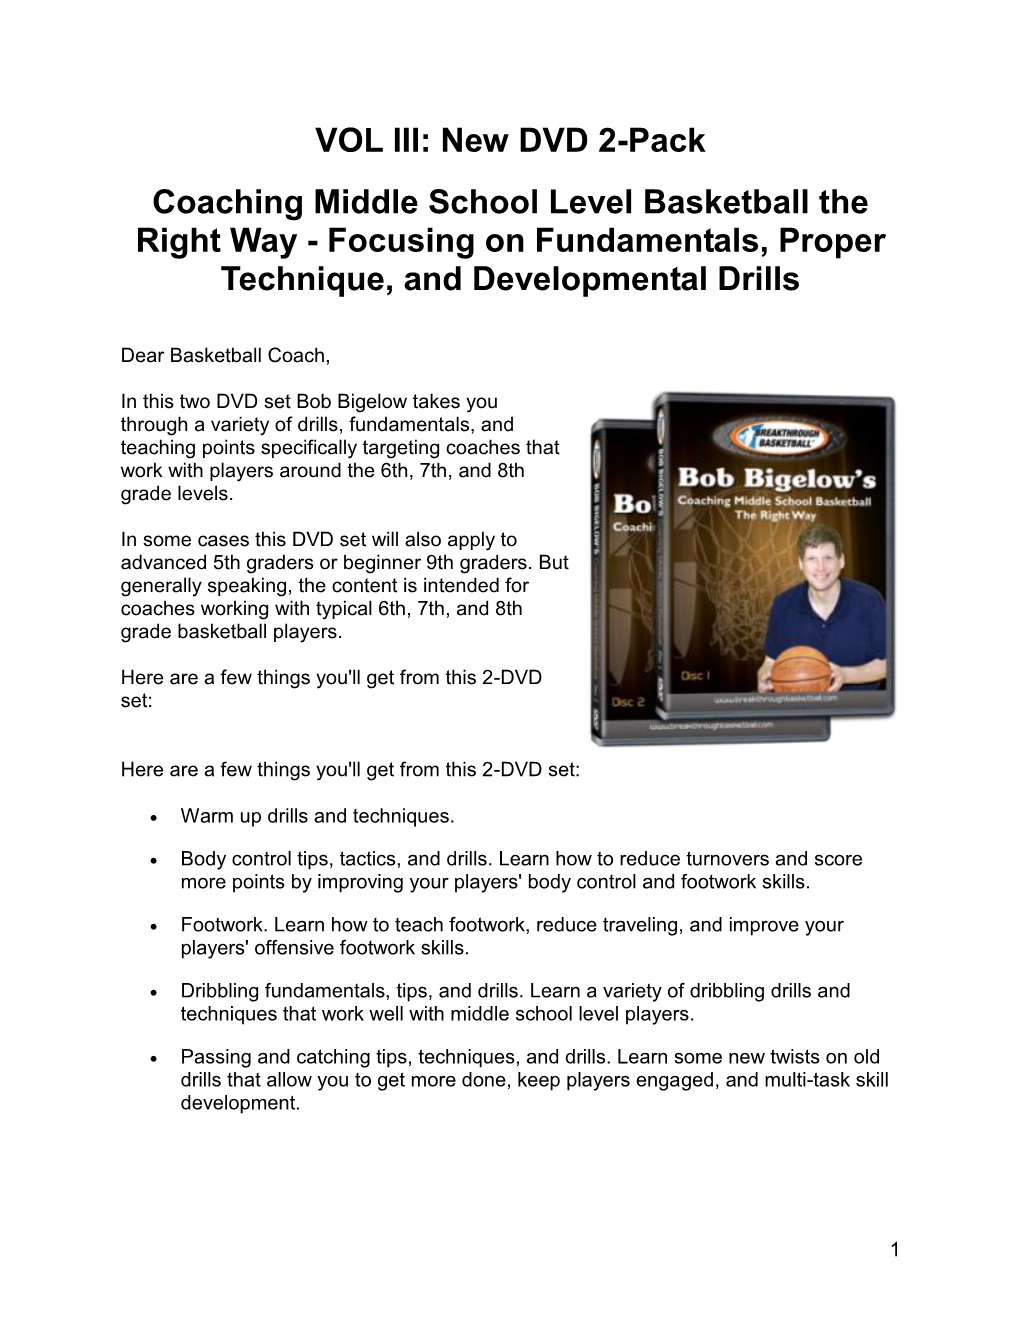 Bob's Three New Dvd Sets for Youth Basketball Coaches